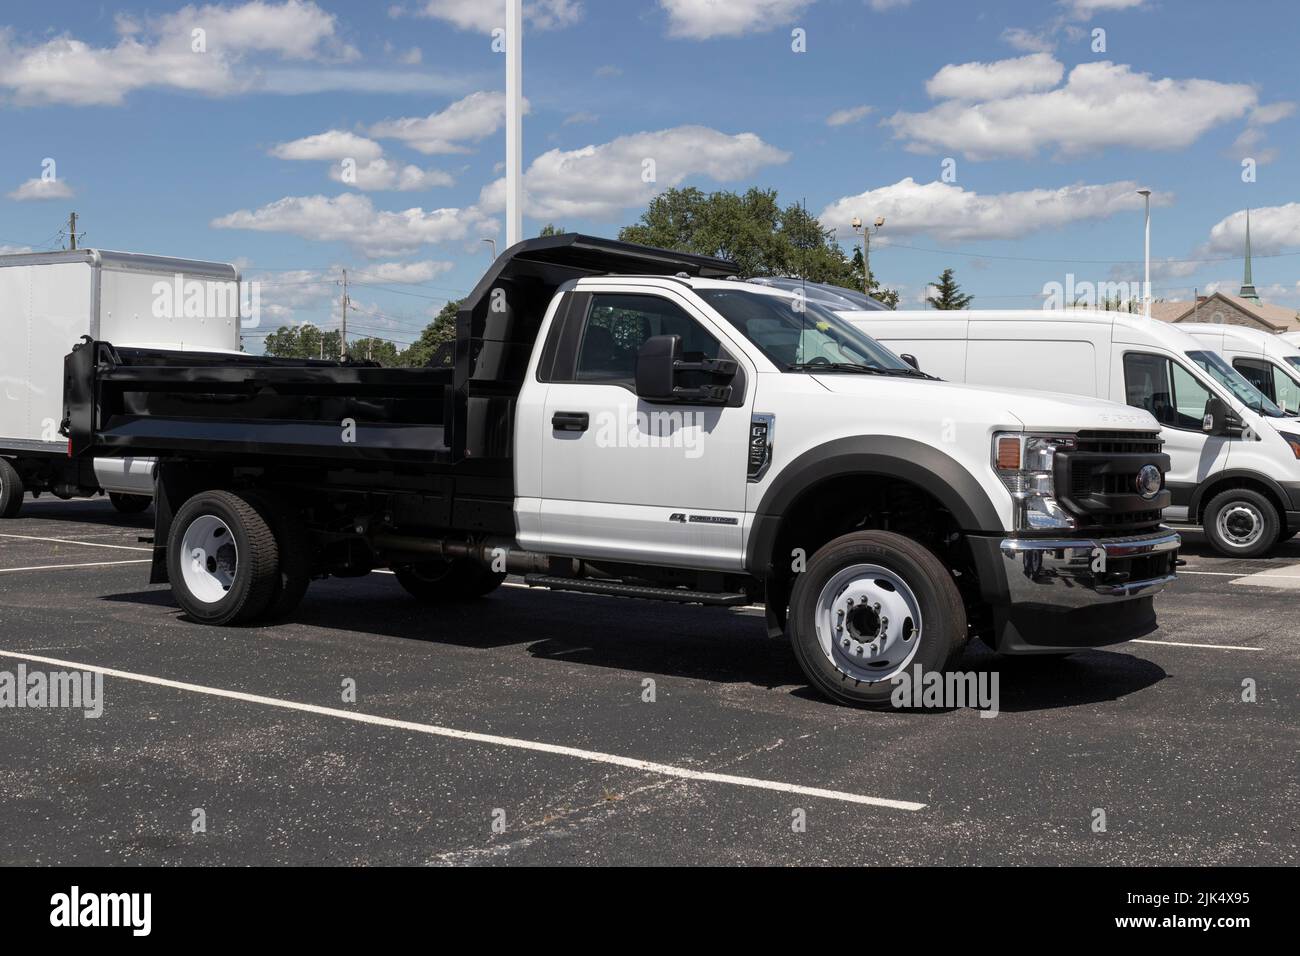 Indianapolis - Circa July 2022: Ford F-450 Dump Truck display at a dealership. The F450 is available in Chassis Cab, and Flatbed models. Stock Photo